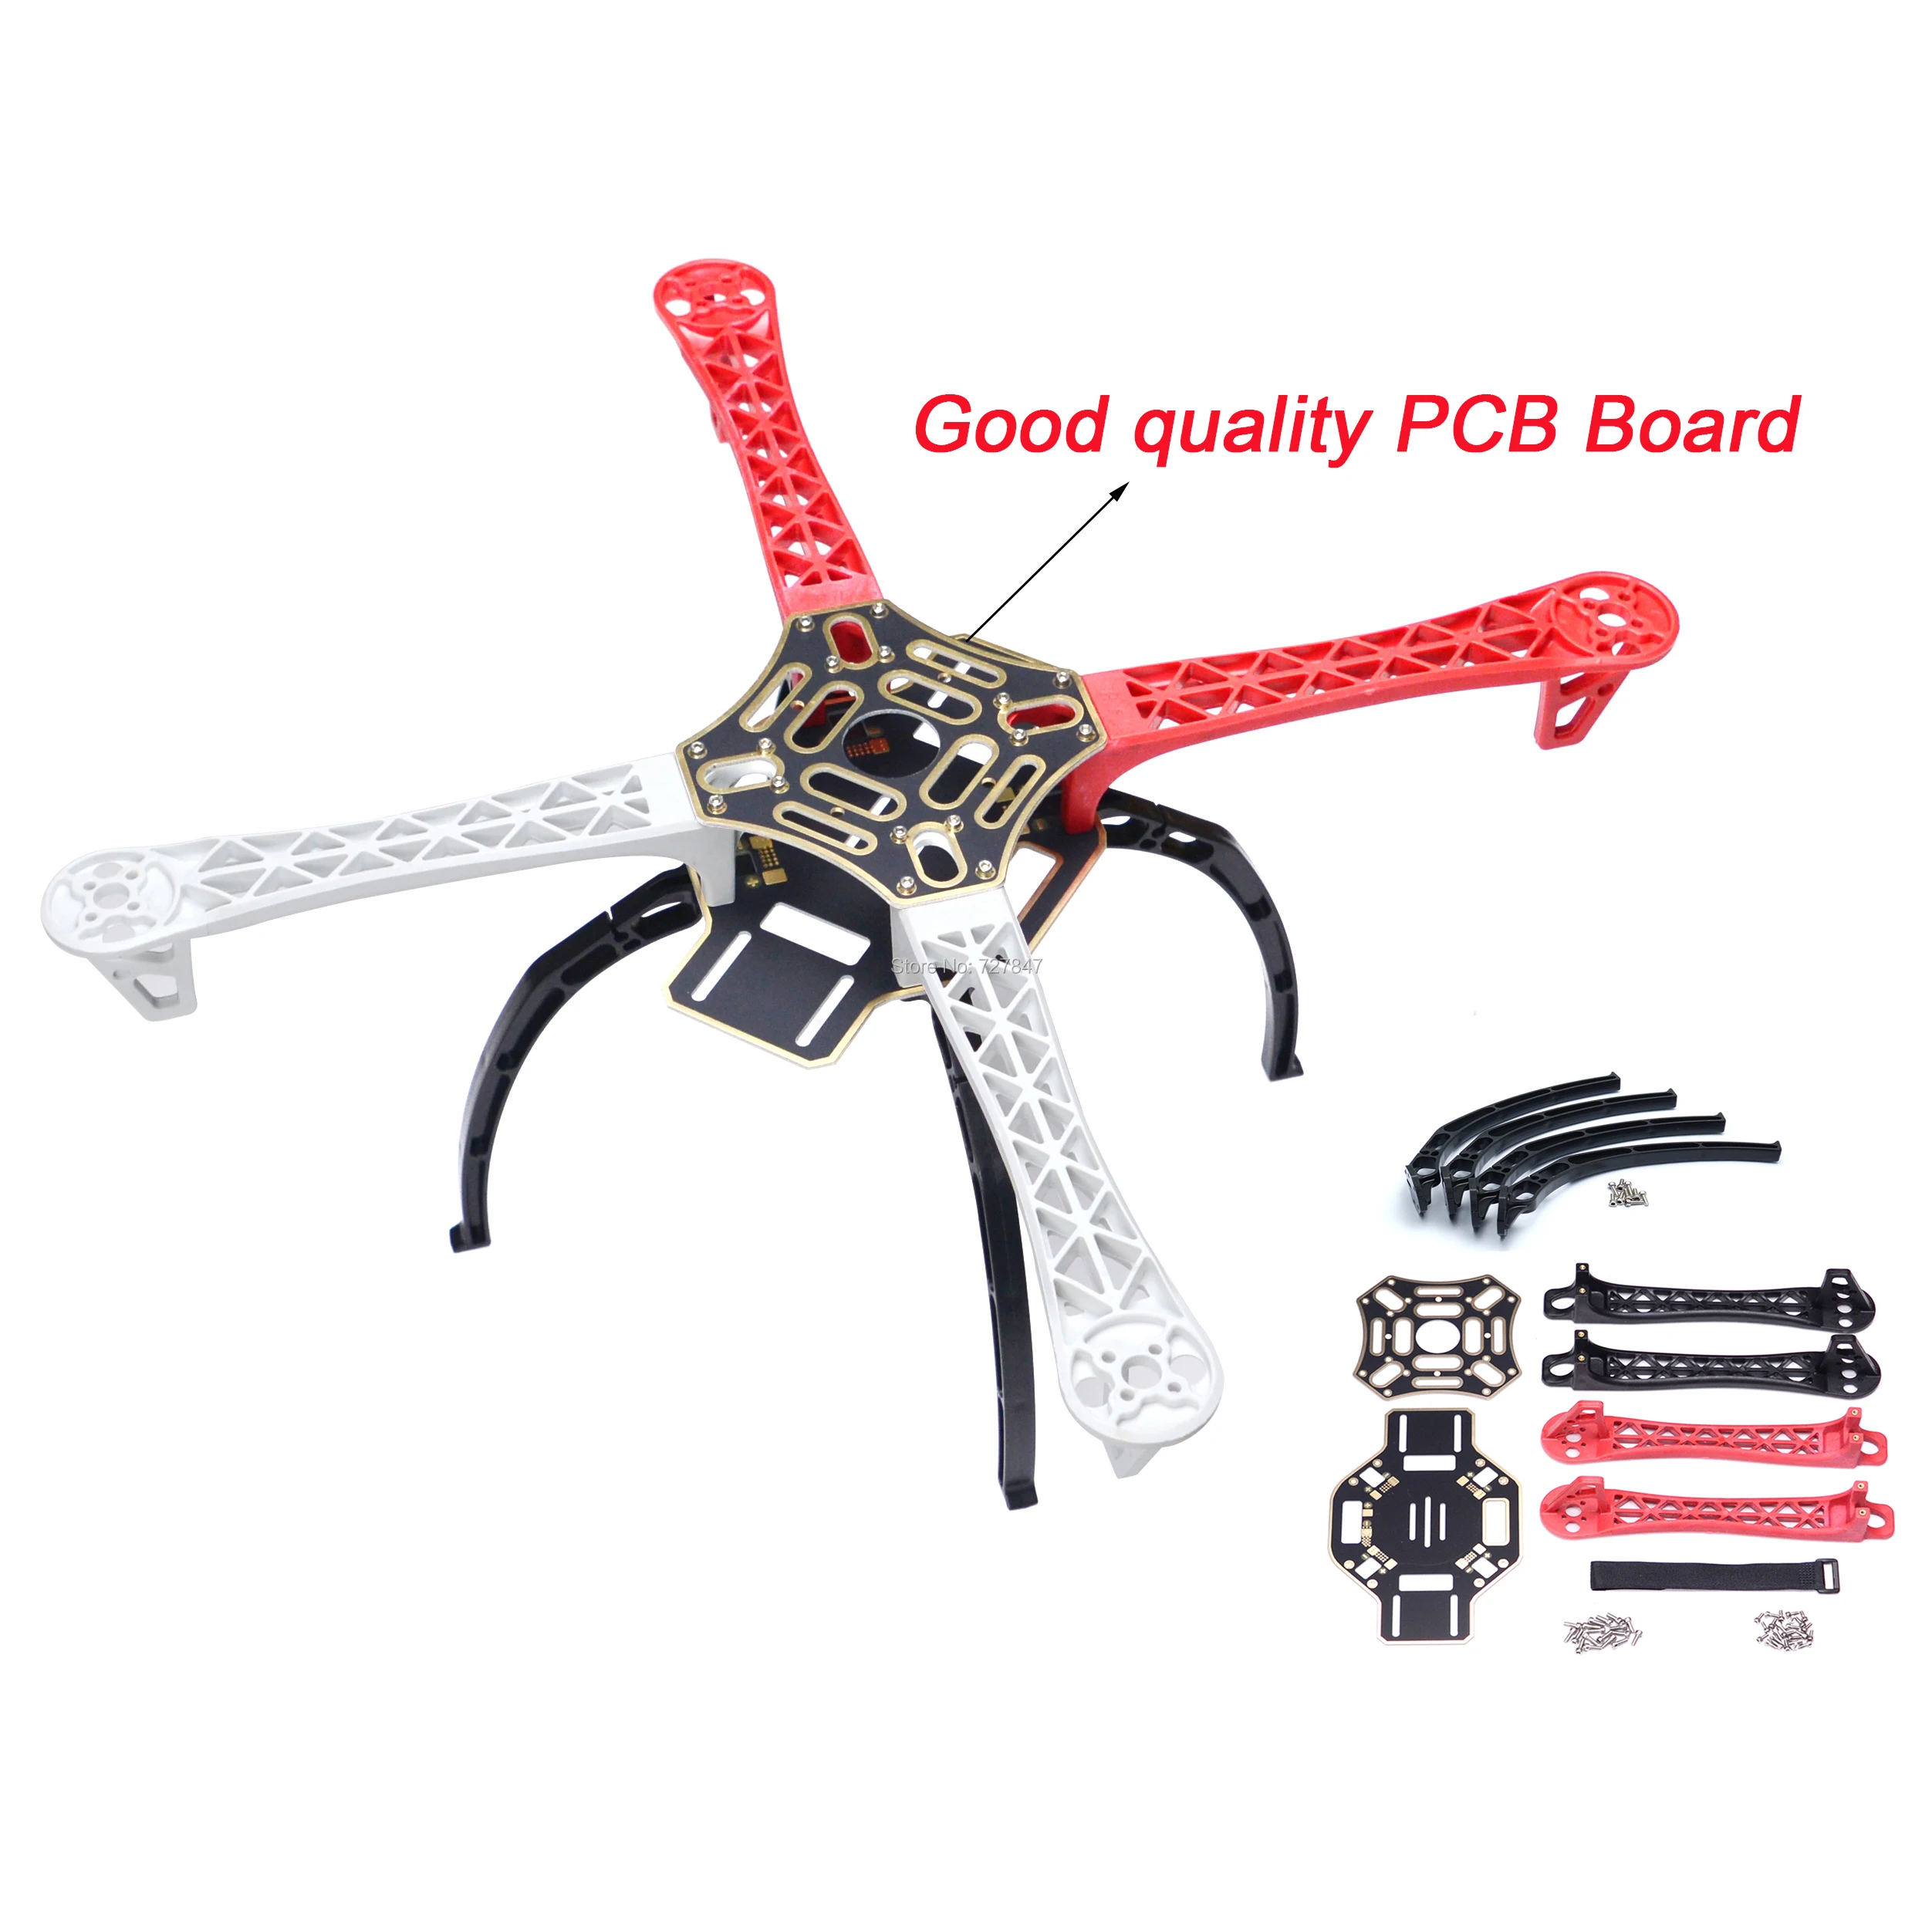 

F450 Drone 450mm Frame w/ Landing Gear Propeller Protective Guard For RC MWC 4 Axis RC Multicopter Quadcopter Heli Multi-Rotor